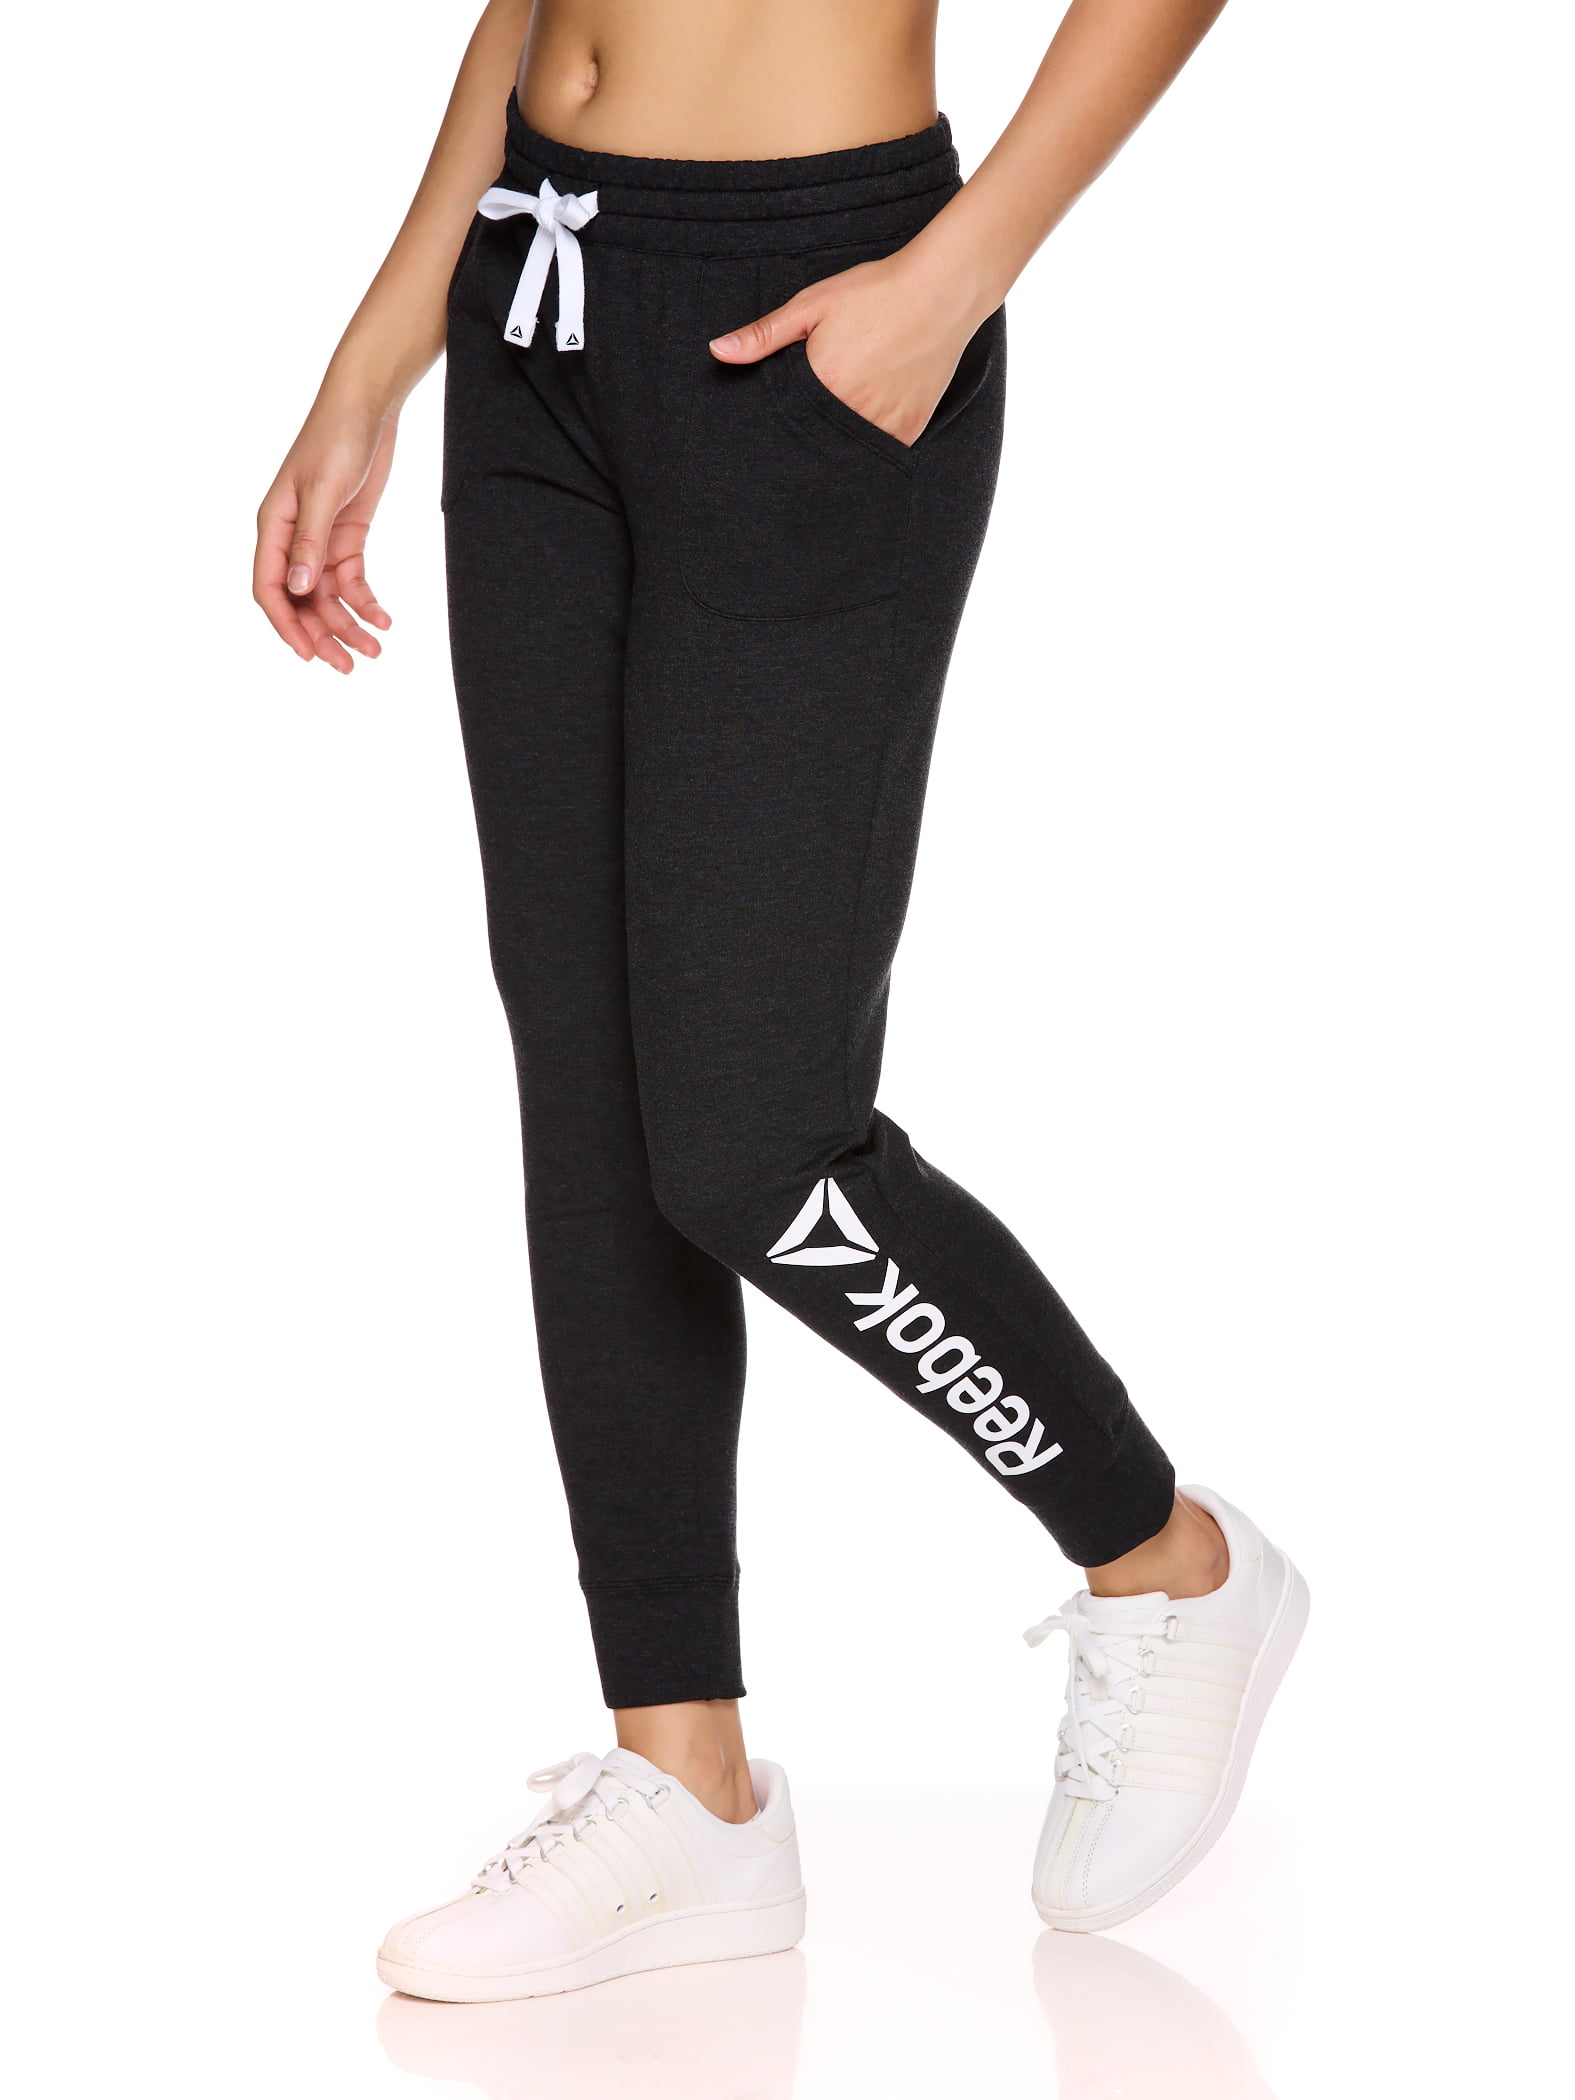 New Women's Reebok All Day Cuffed Jogger, Plus Size 4X, Color Black Heather